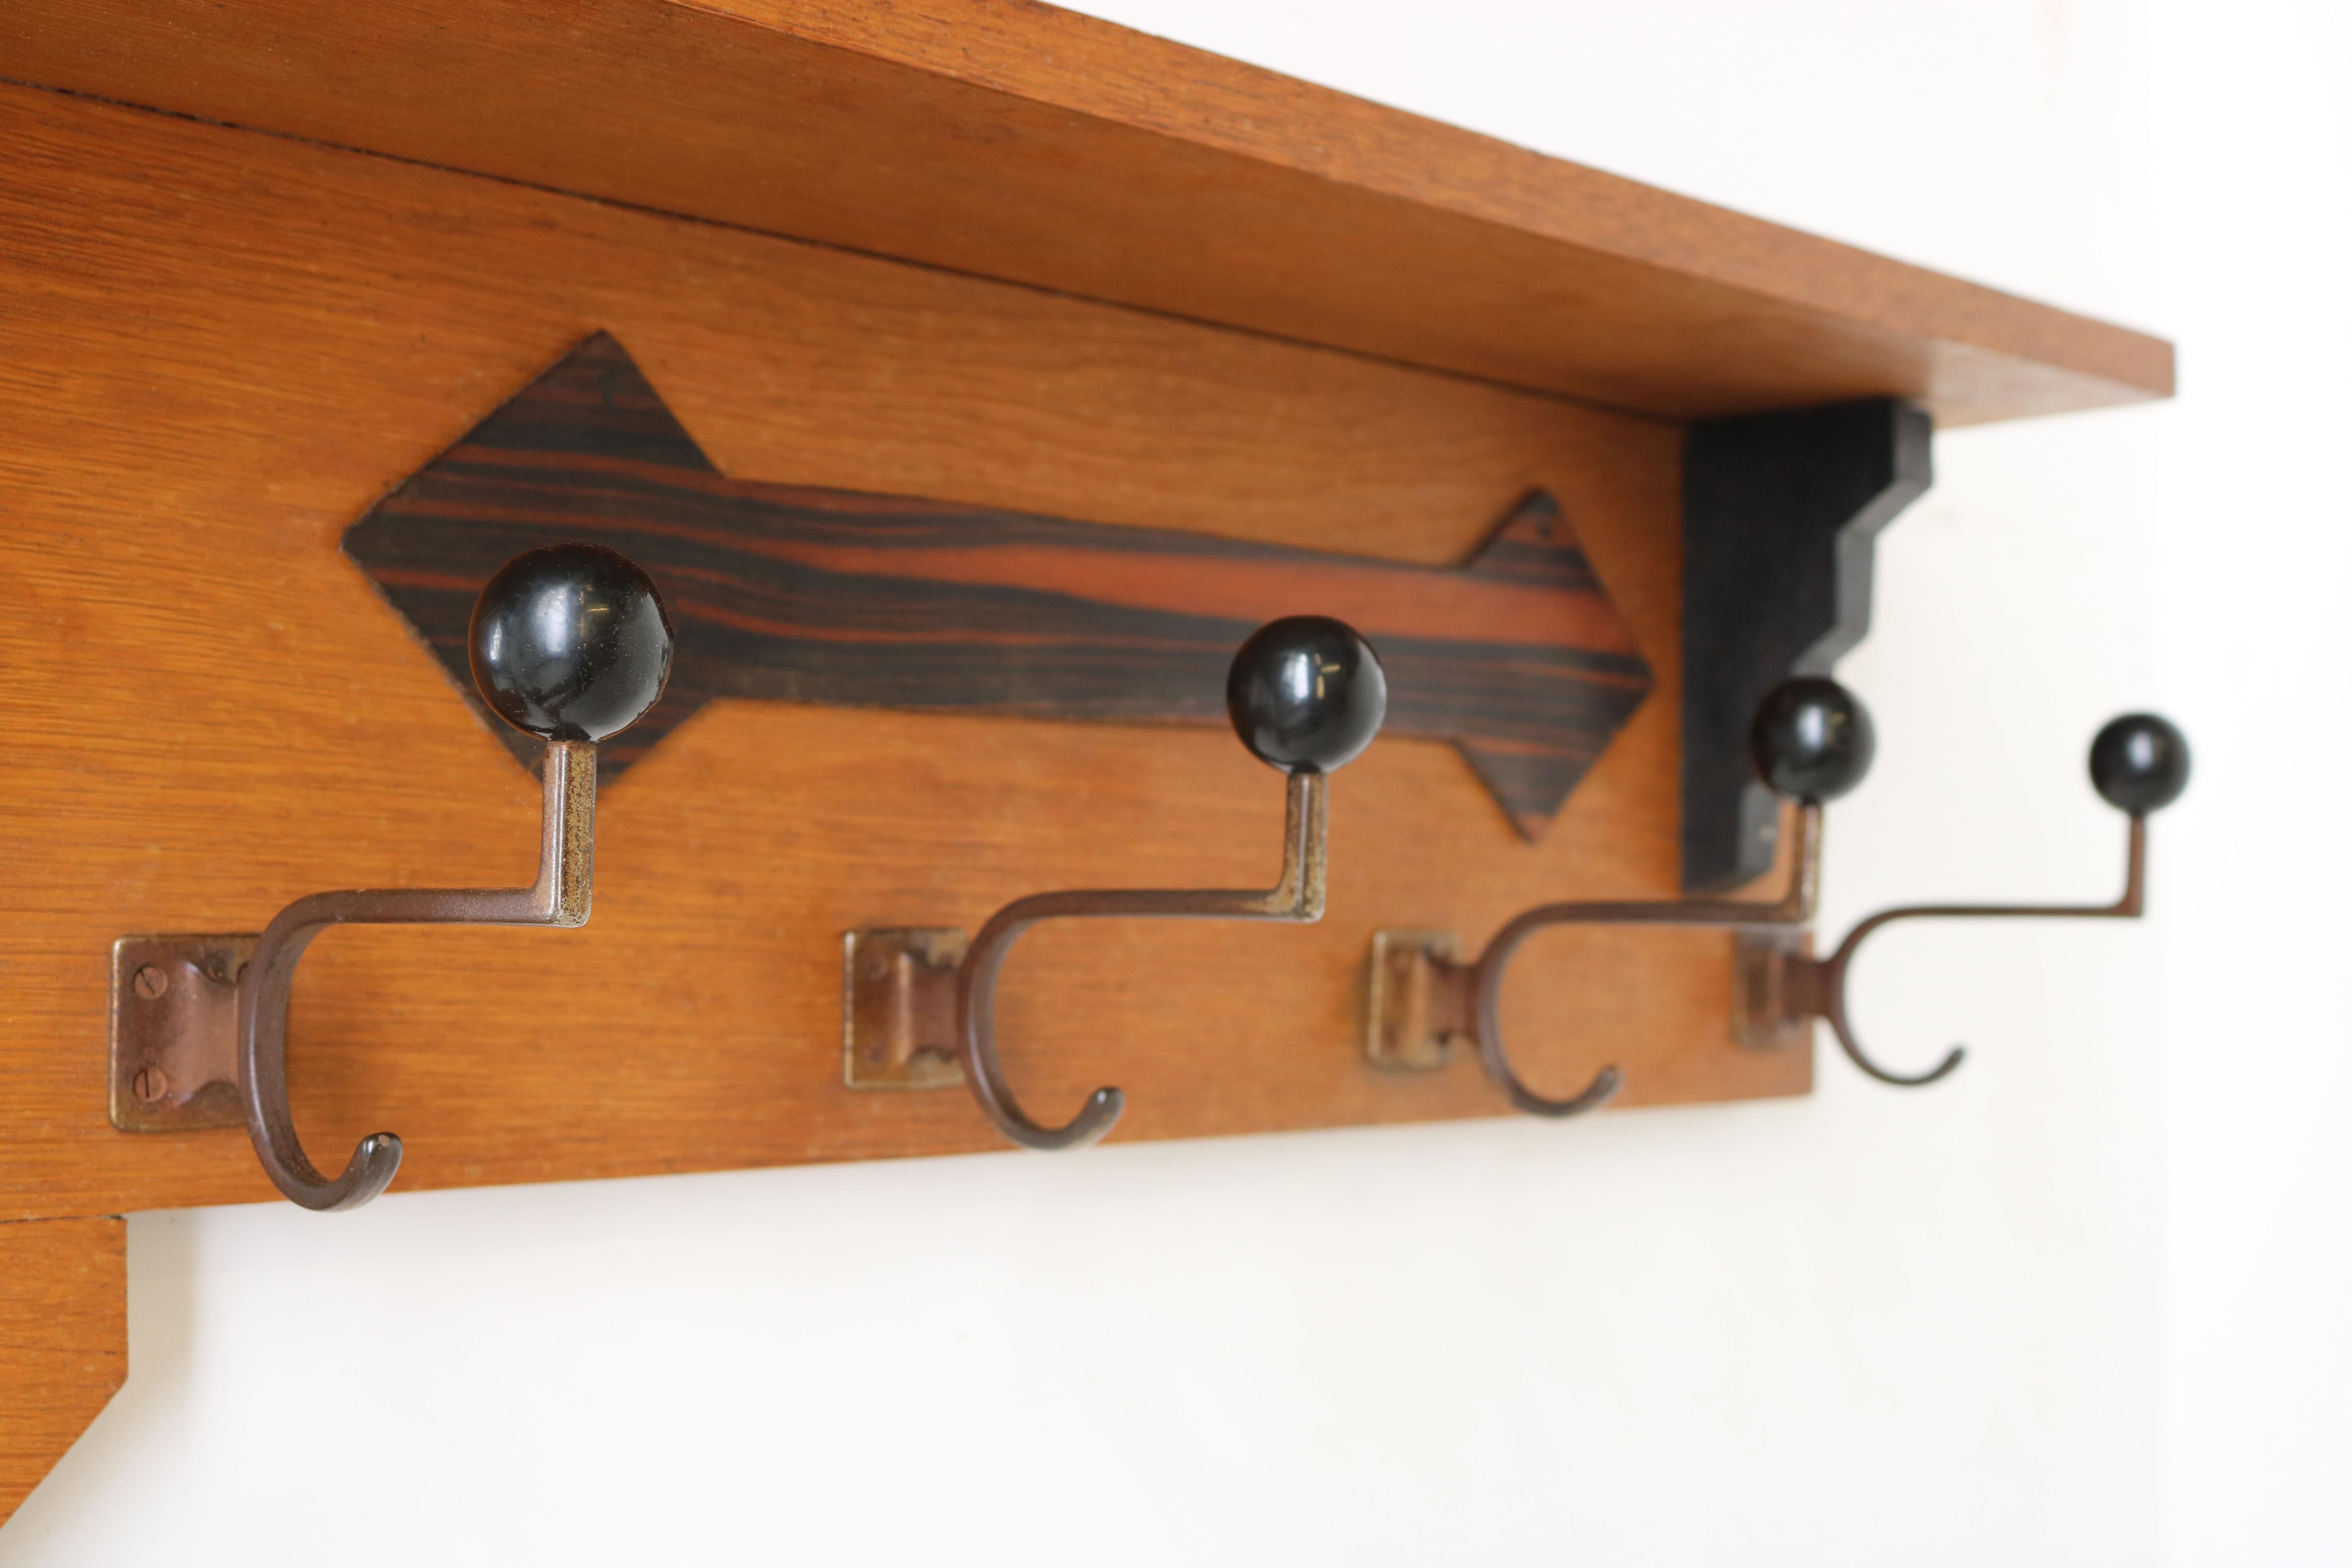 Marvelous Dutch Art Deco Amsterdam school coat / hat rack with beveled mirror.
Made from European Oak & black accents and Macassar decorated detail. Exquisite Art Deco design with typical Amsterdam School elements. 
Asymmetrical stair shape going